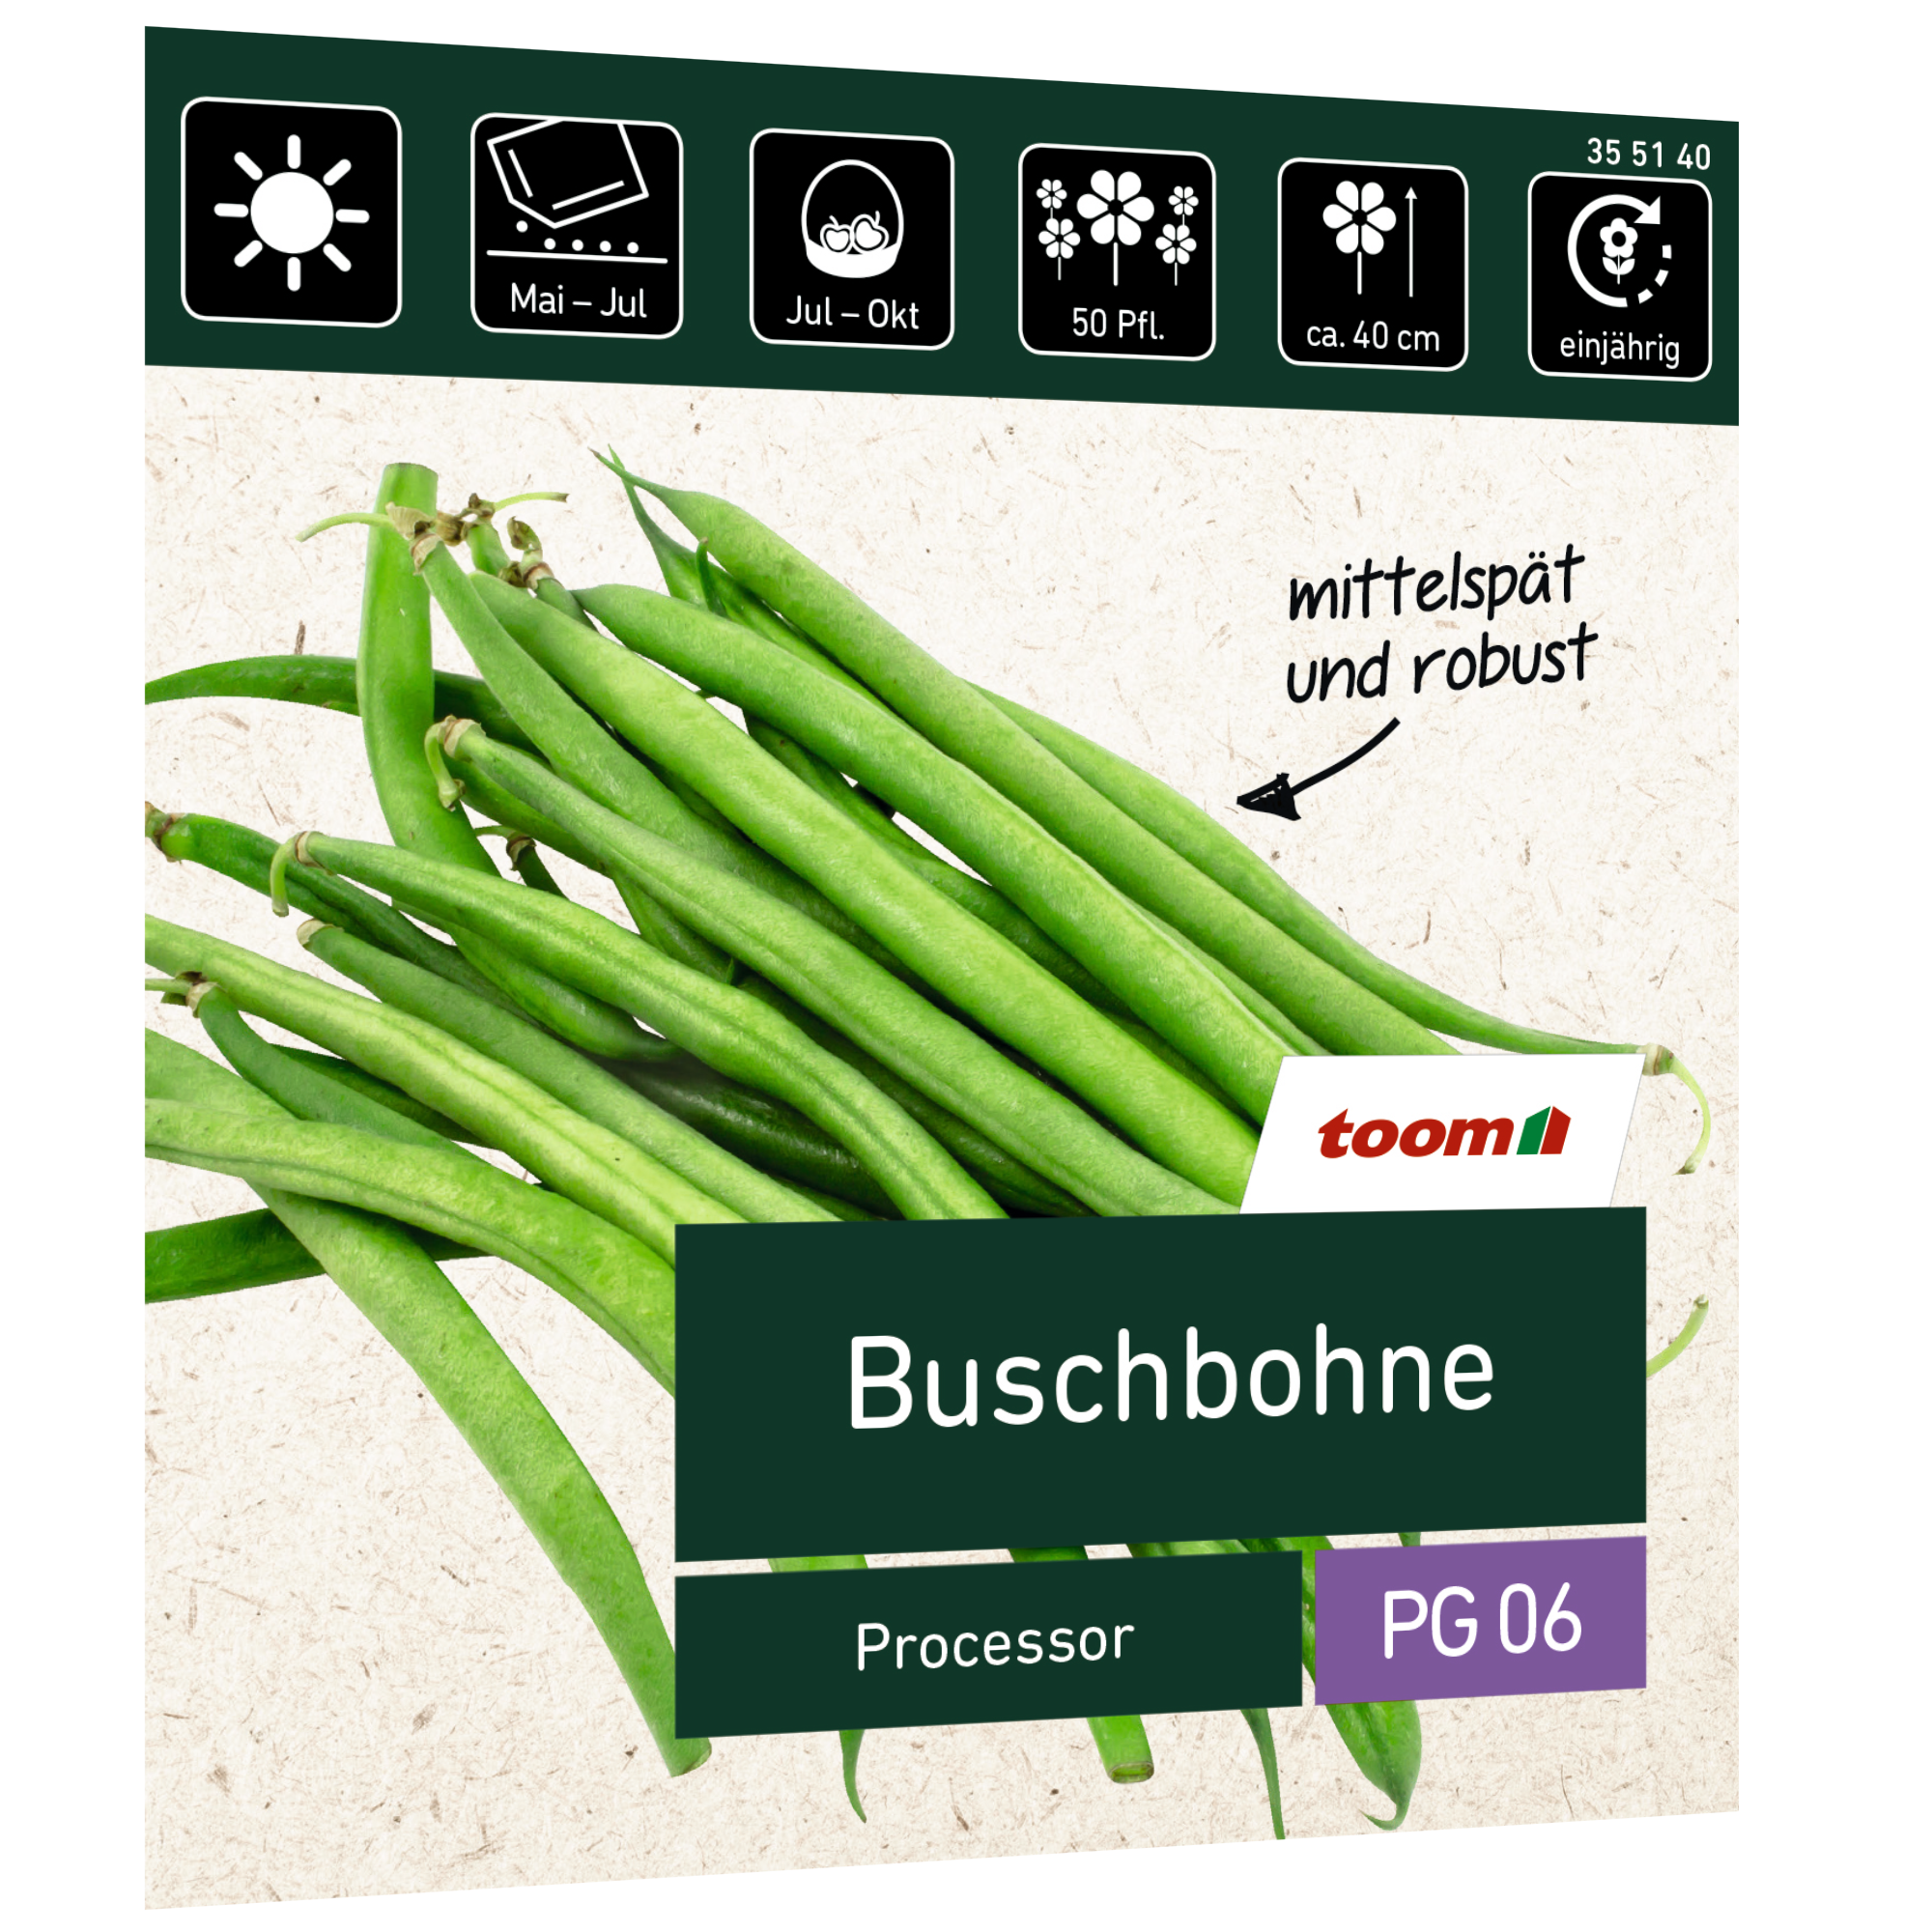 Buschbohne 'Processor' + product picture